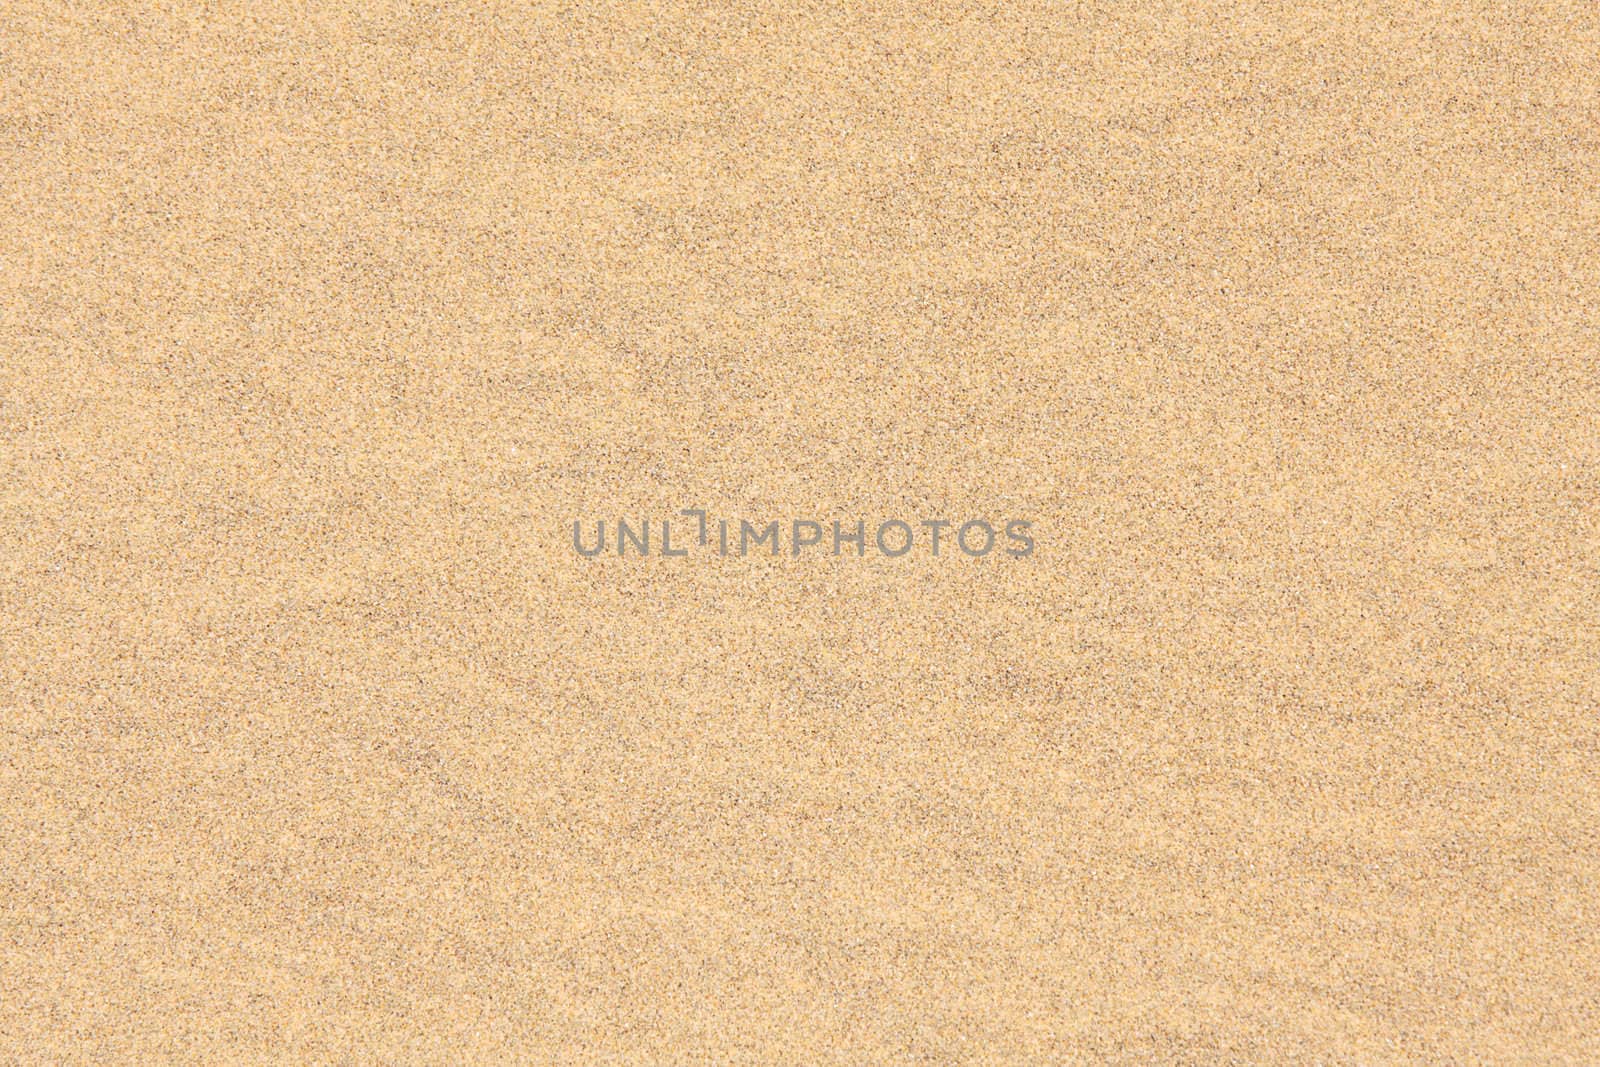 Abstract background of sand by svanblar